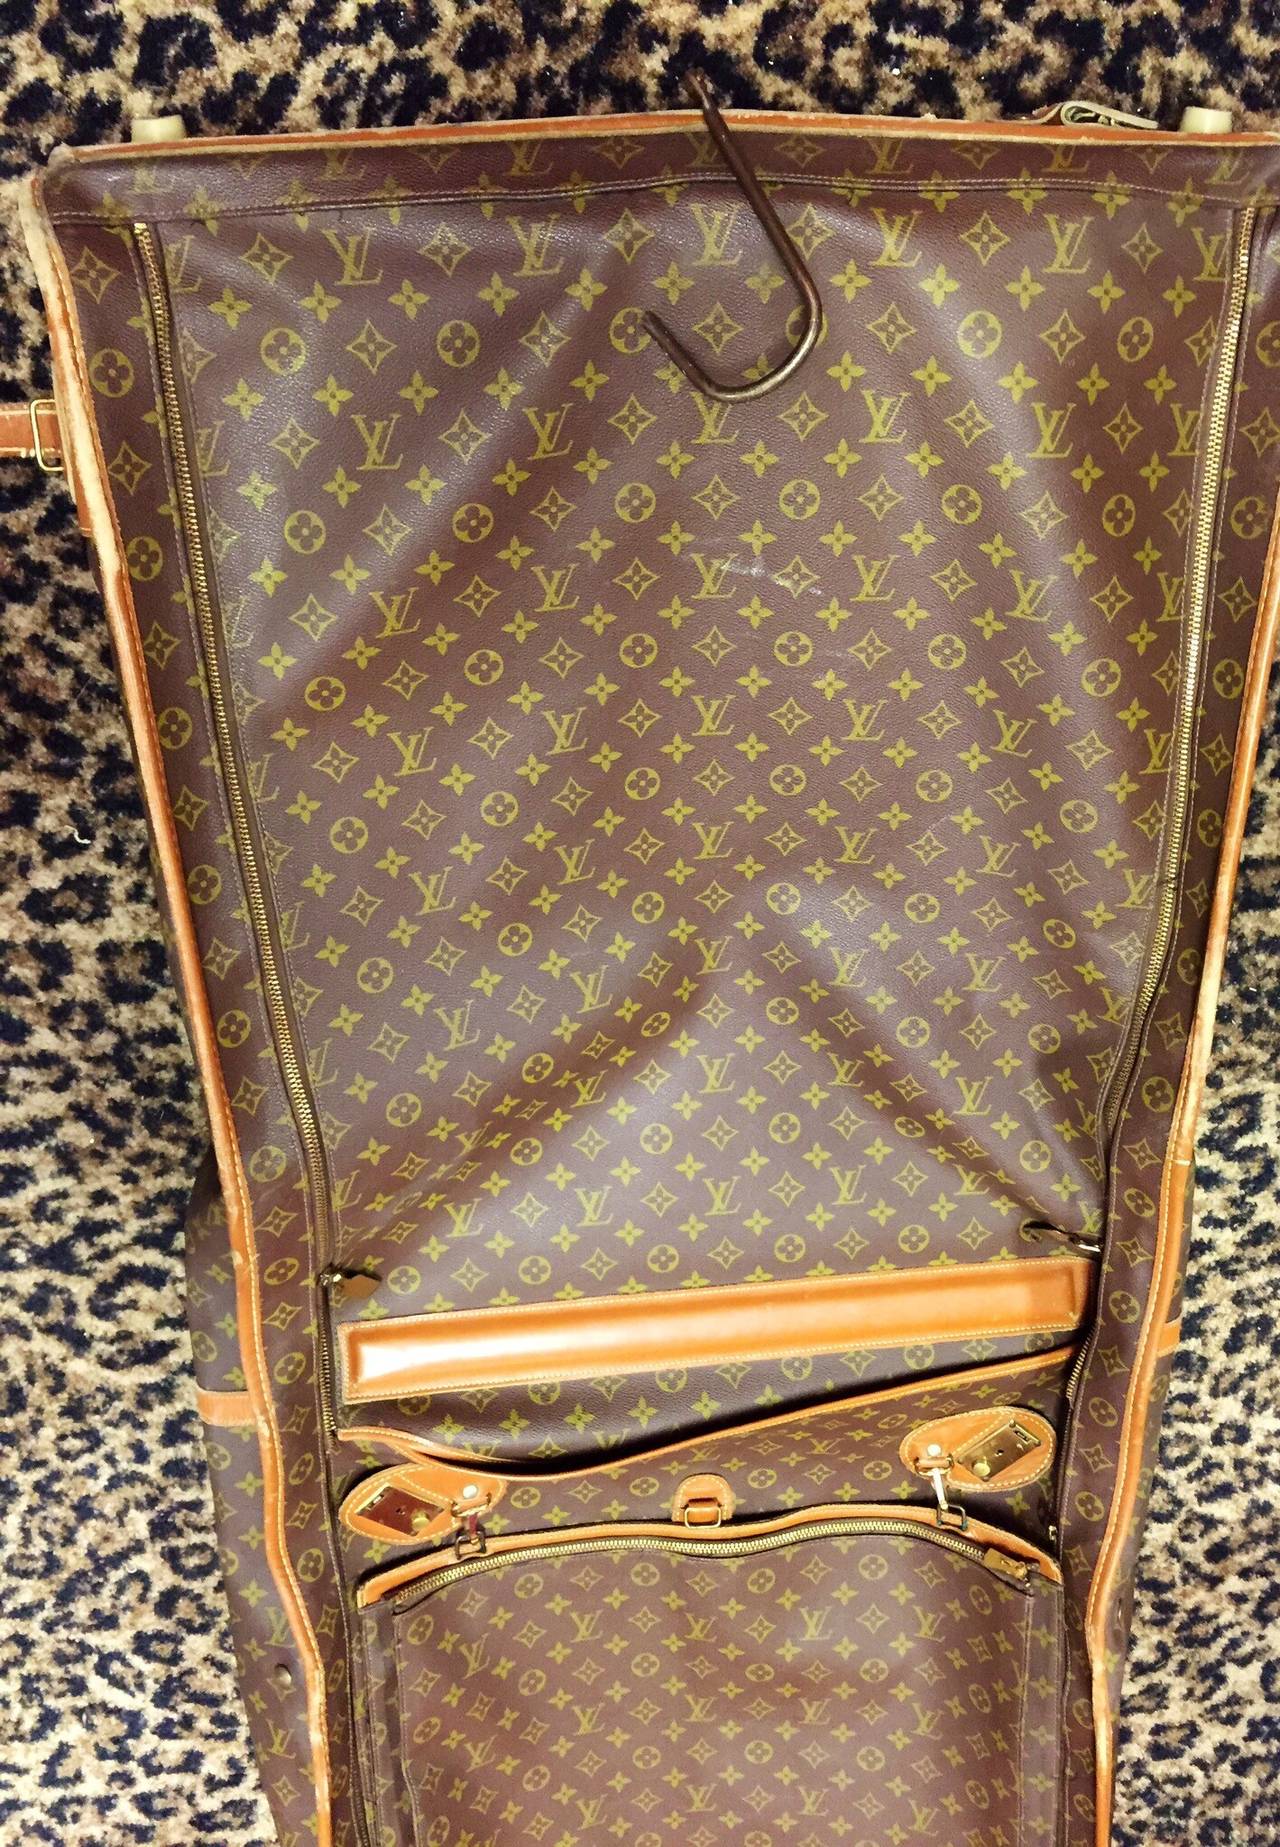 Vintage Rare Louis Vuitton French Company Monogram Garment Travel Bag In Fair Condition For Sale In Lake Park, FL